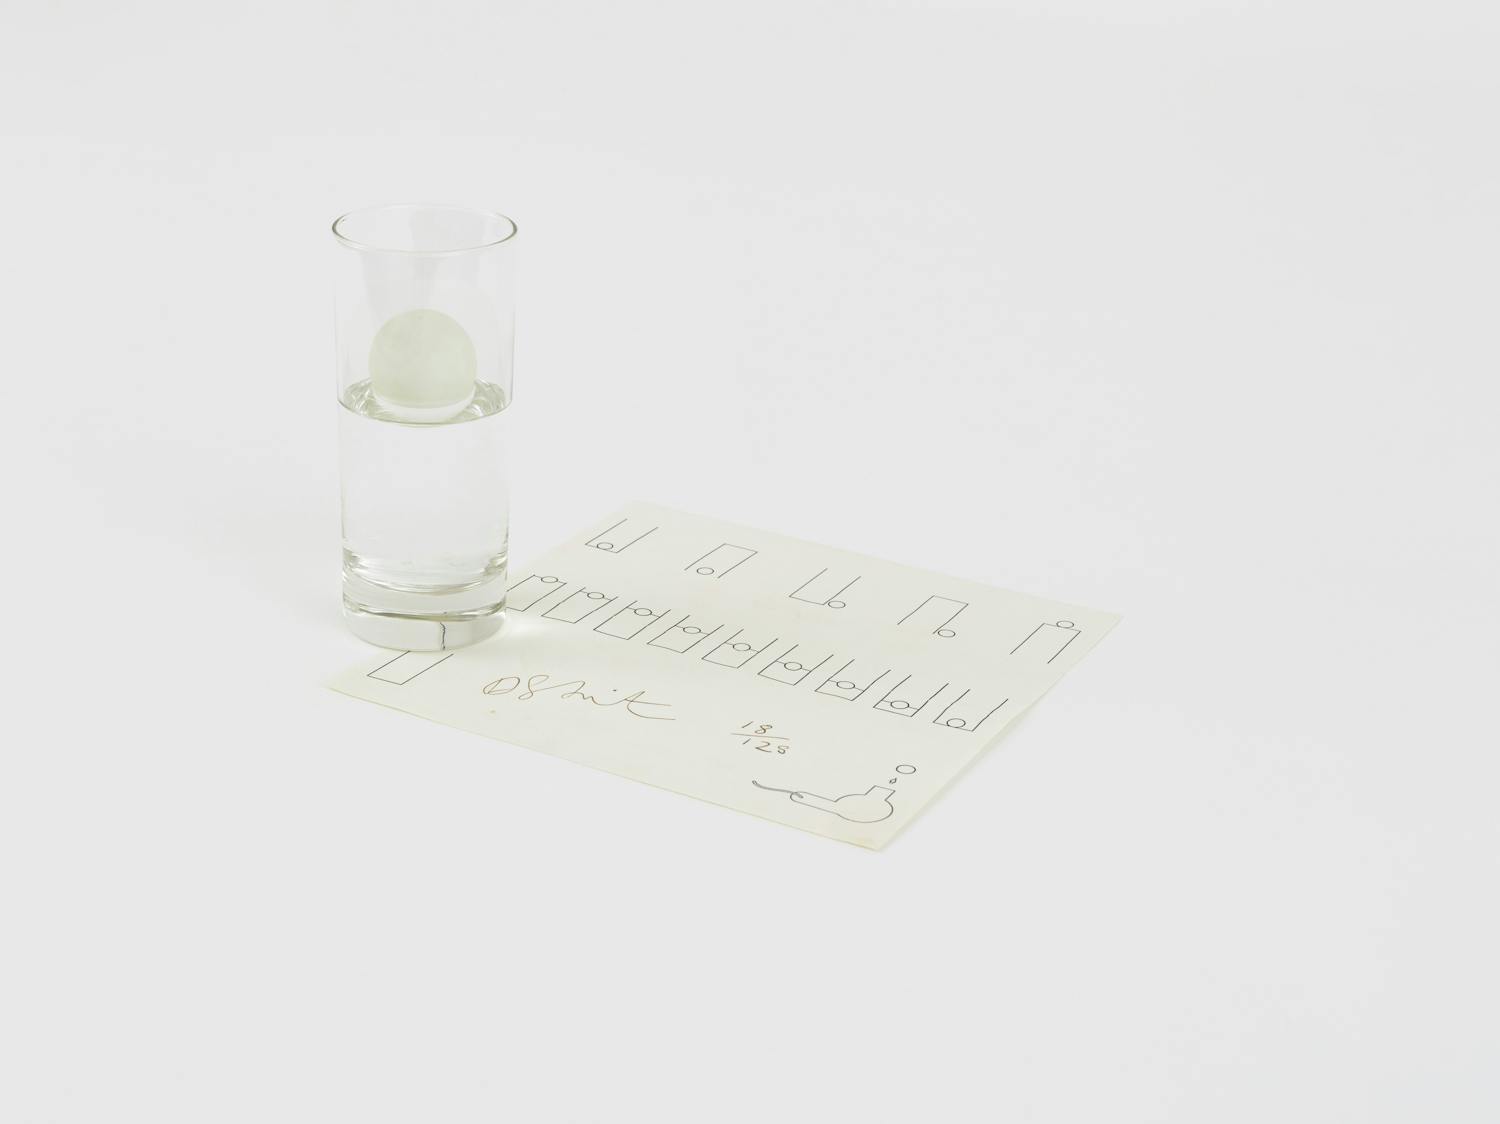 [ID: The image shows a transparent glass half filled with water; a ping pong ball is floating on the surface. The glass sits on top of a white sheet of paper. On the paper, the artist has drawn a series of diagrams that represent the possible ways for the glass, ping pong ball and water to interact. End of ID]